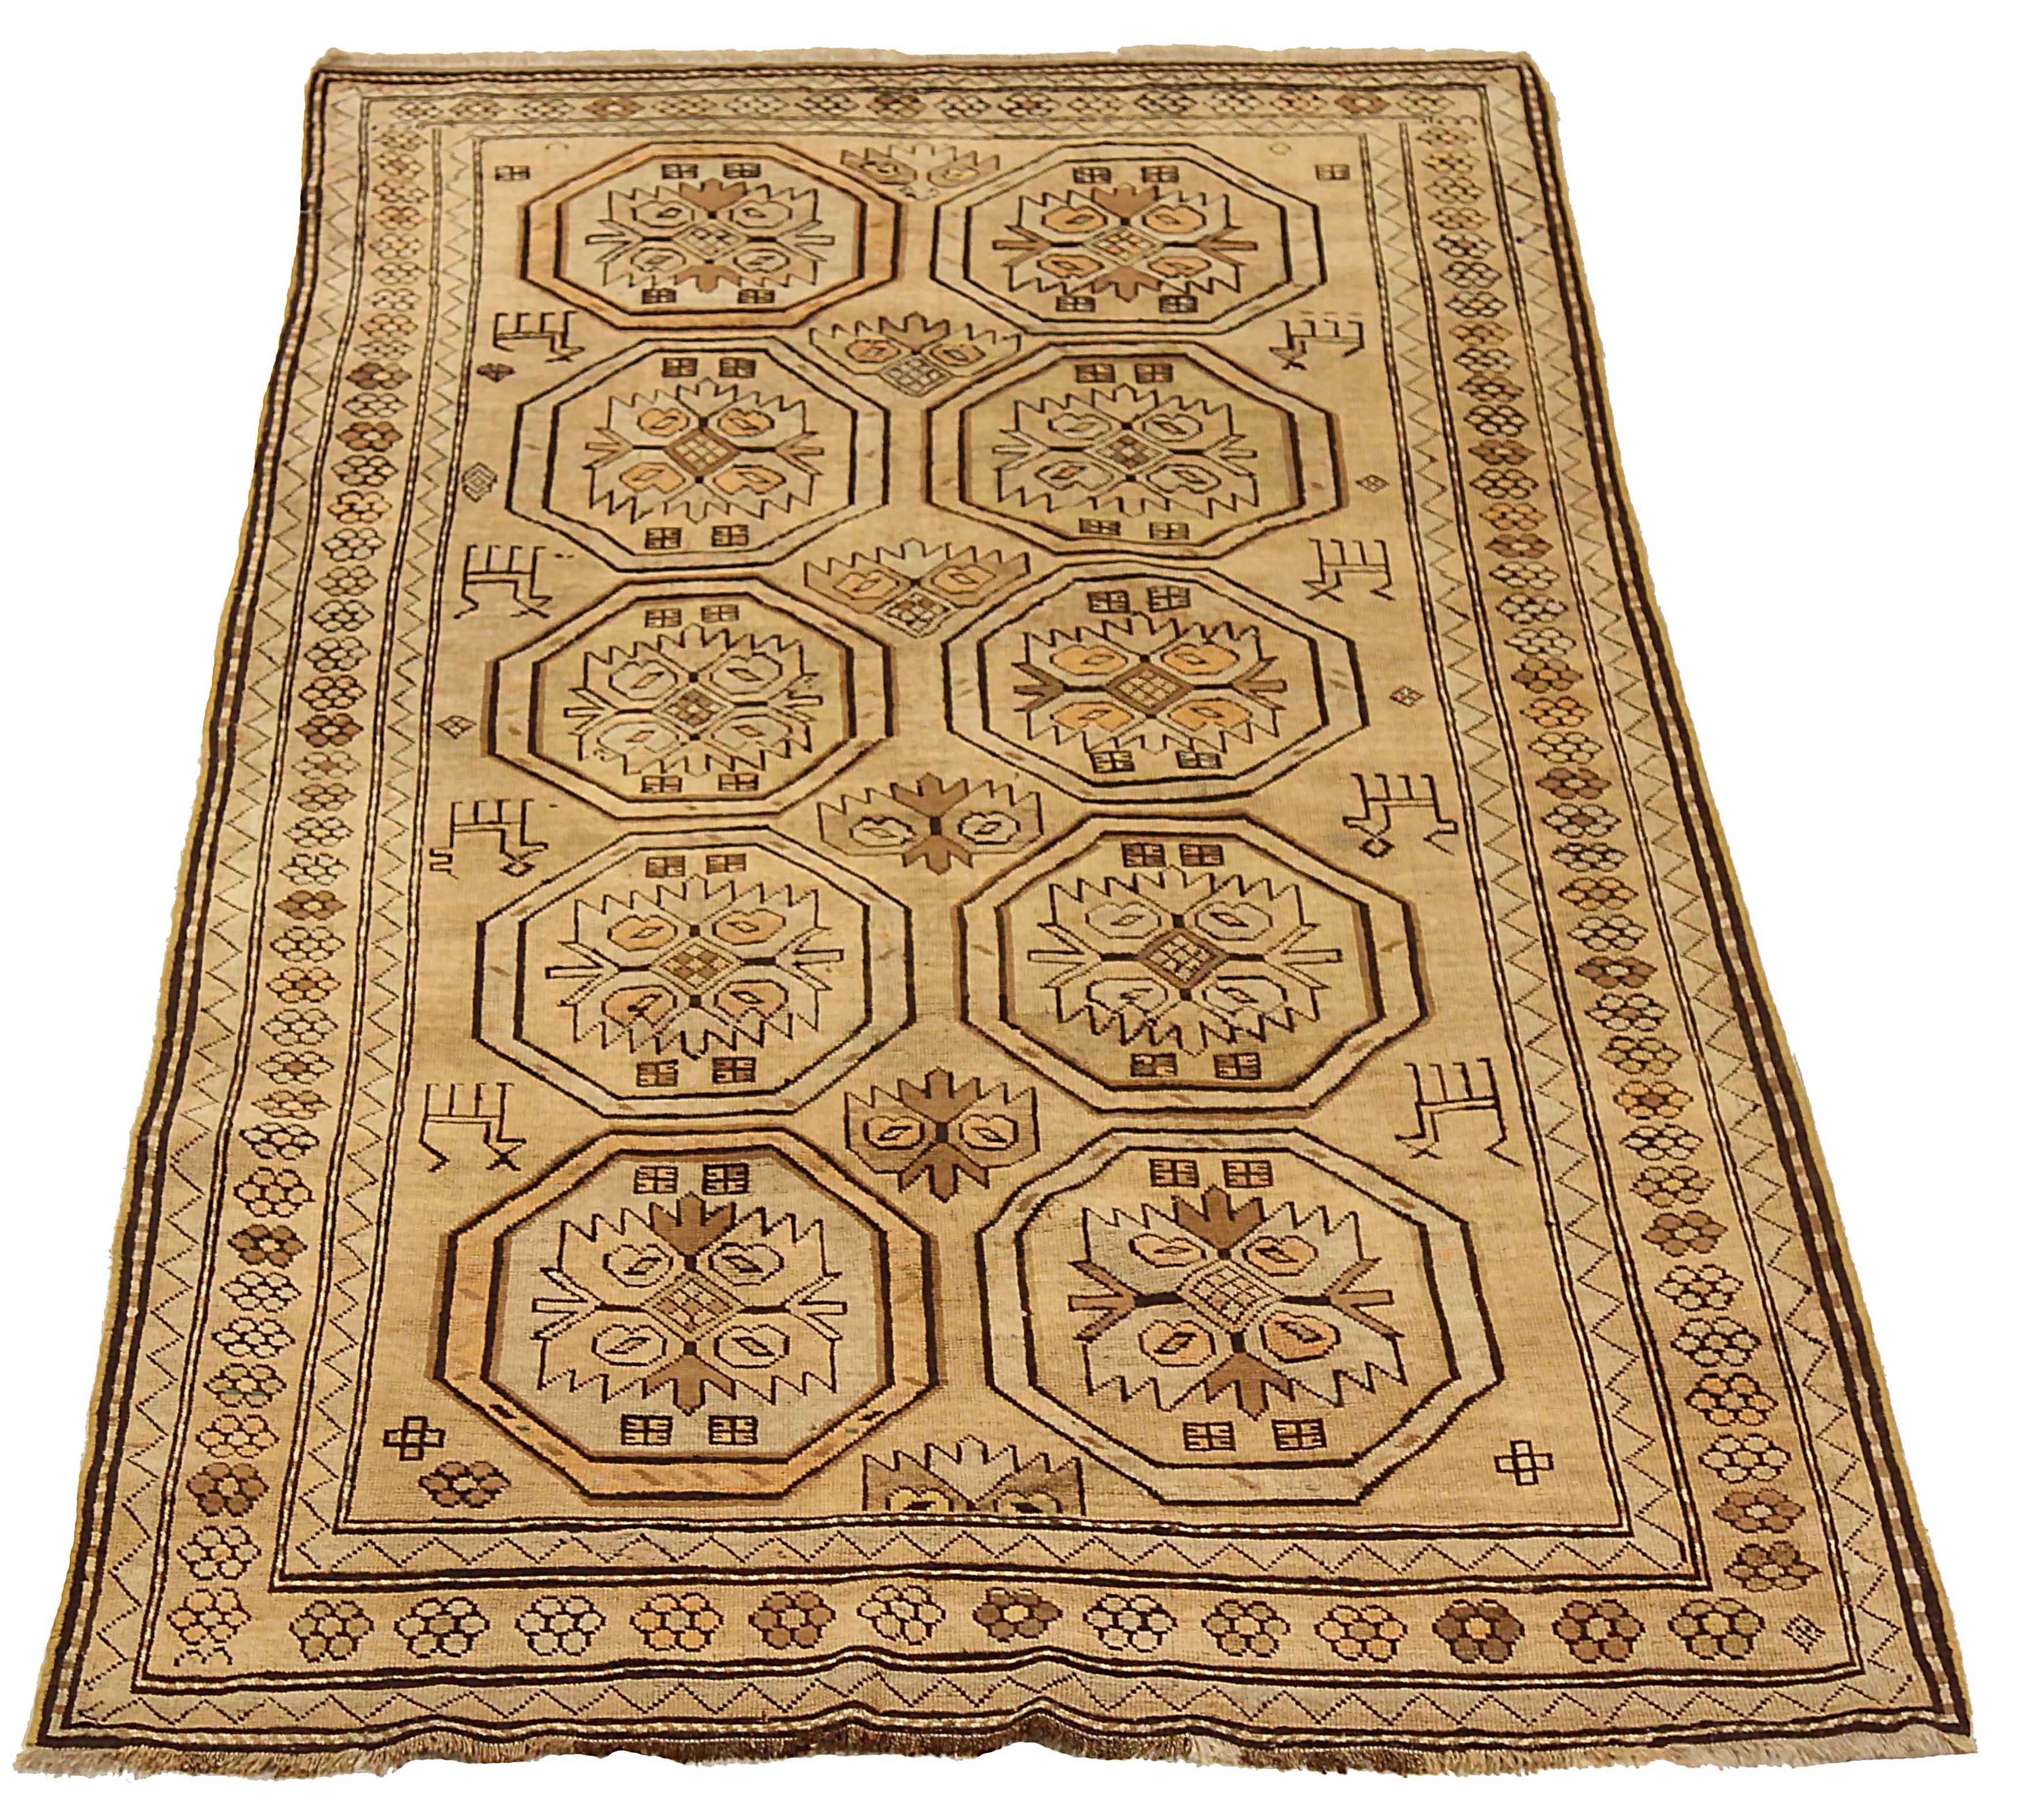 Antique Russian area rug handwoven from the finest sheep’s wool. It’s colored with all-natural vegetable dyes that are safe for humans and pets. It’s a traditional Shirvan design handwoven by expert artisans. It’s a lovely area rug that can be